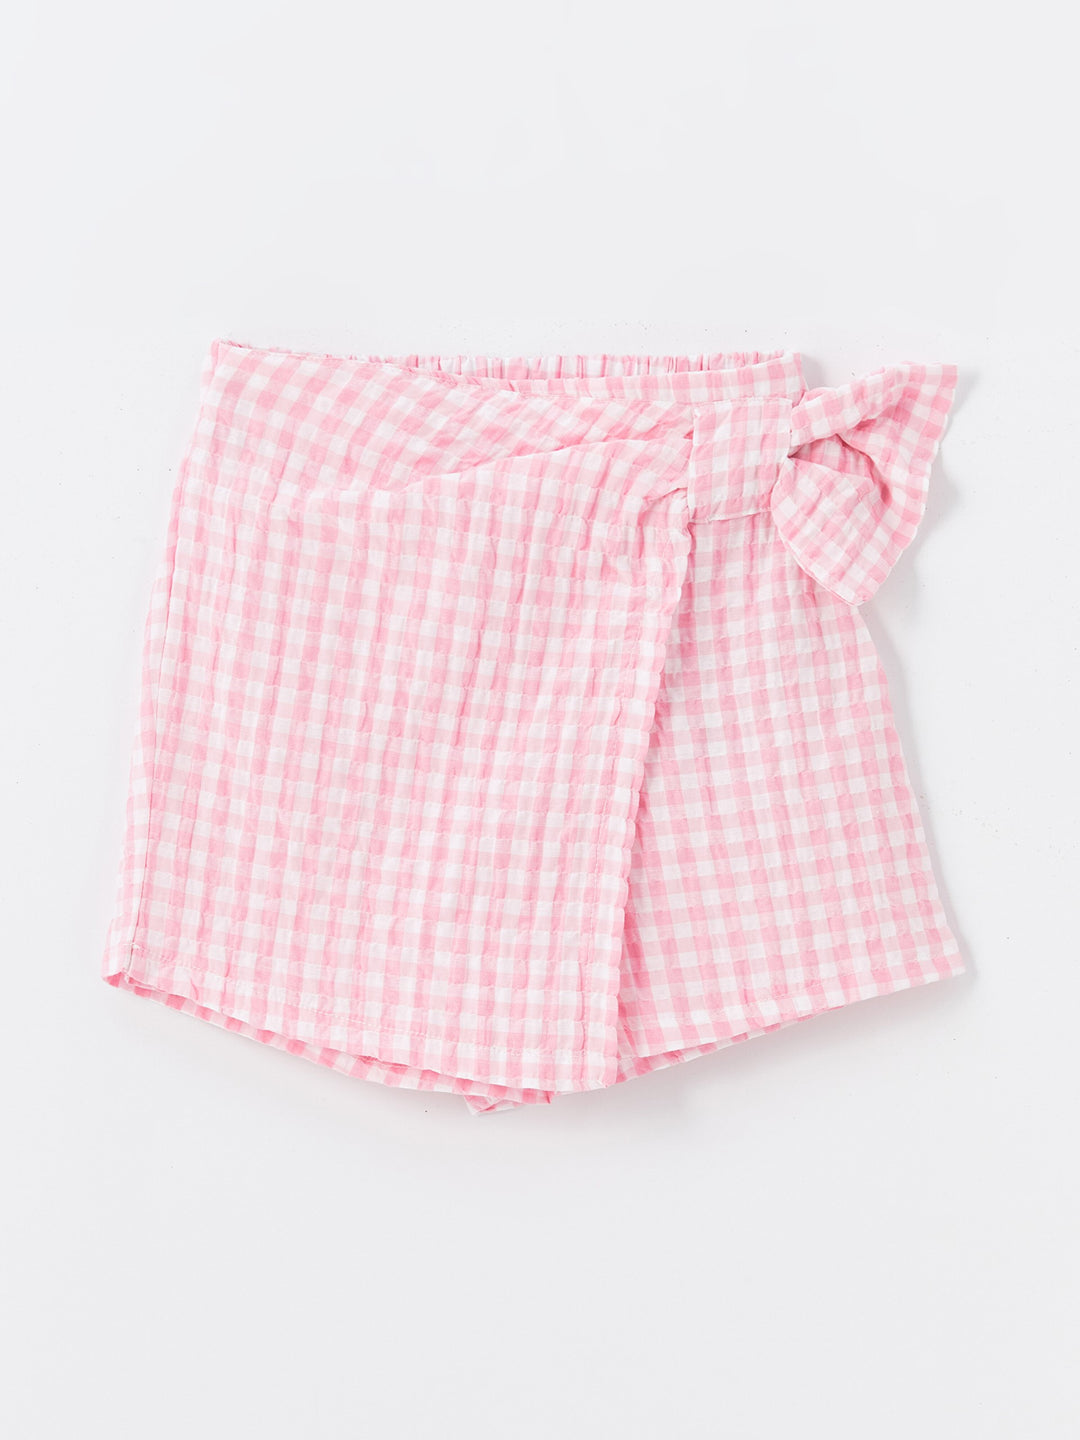 Square Neck Girls Blouse and Shorts Skirt